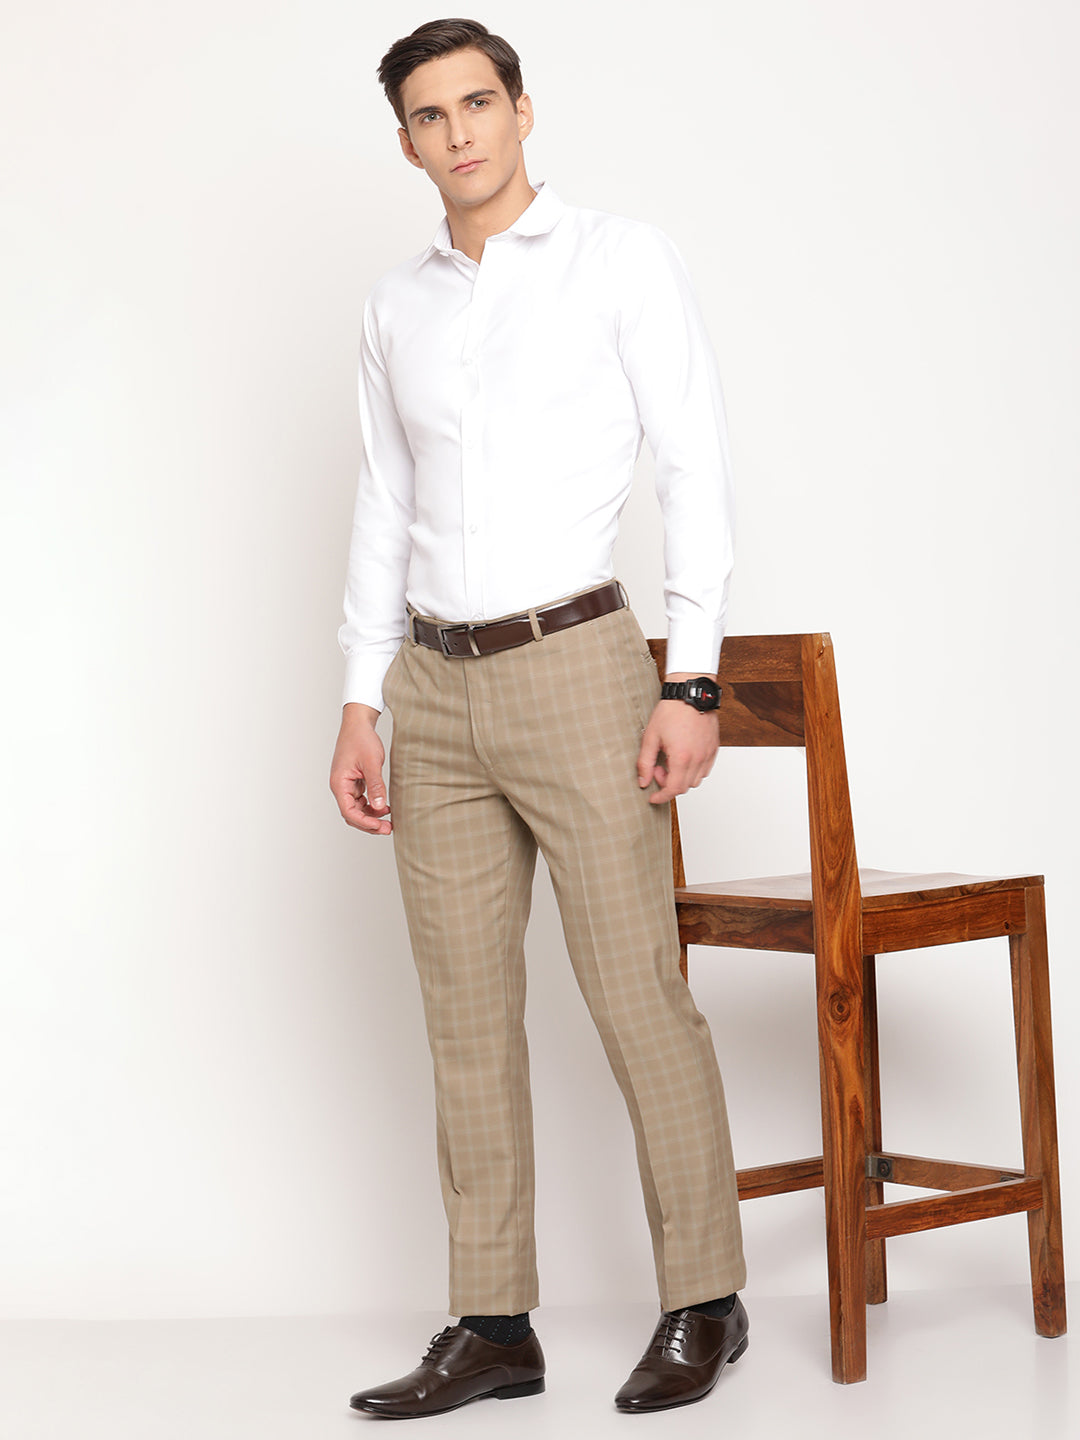 Angelico Cream trousers stretch cotton comfort, trousers for Man, made of  stretch cotton, beige